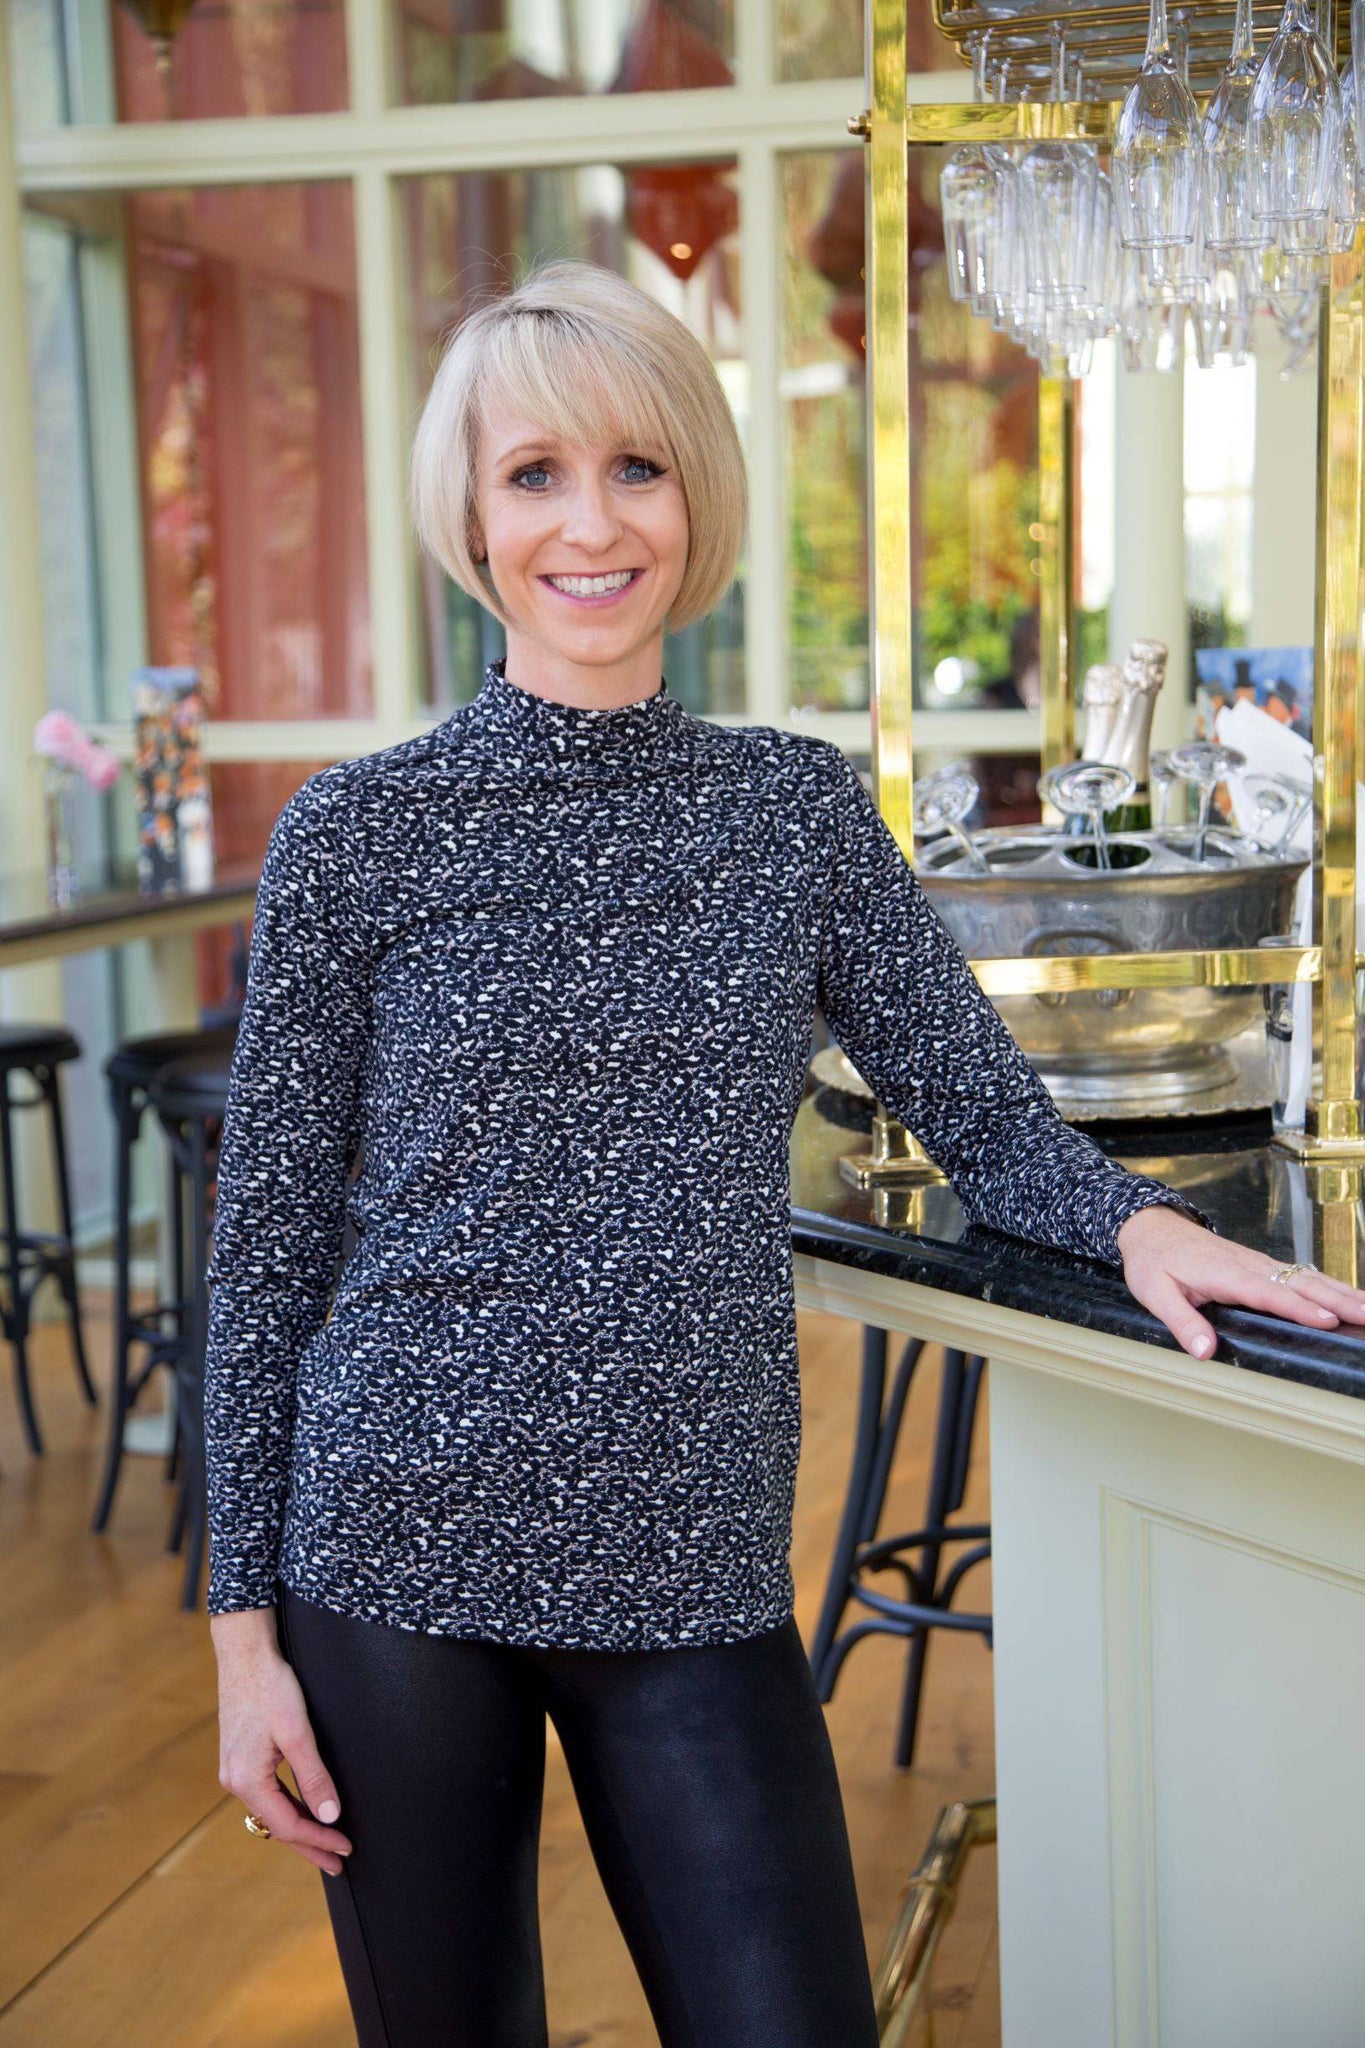 Garcia blouse with Leopard Print - Your Style Your Story